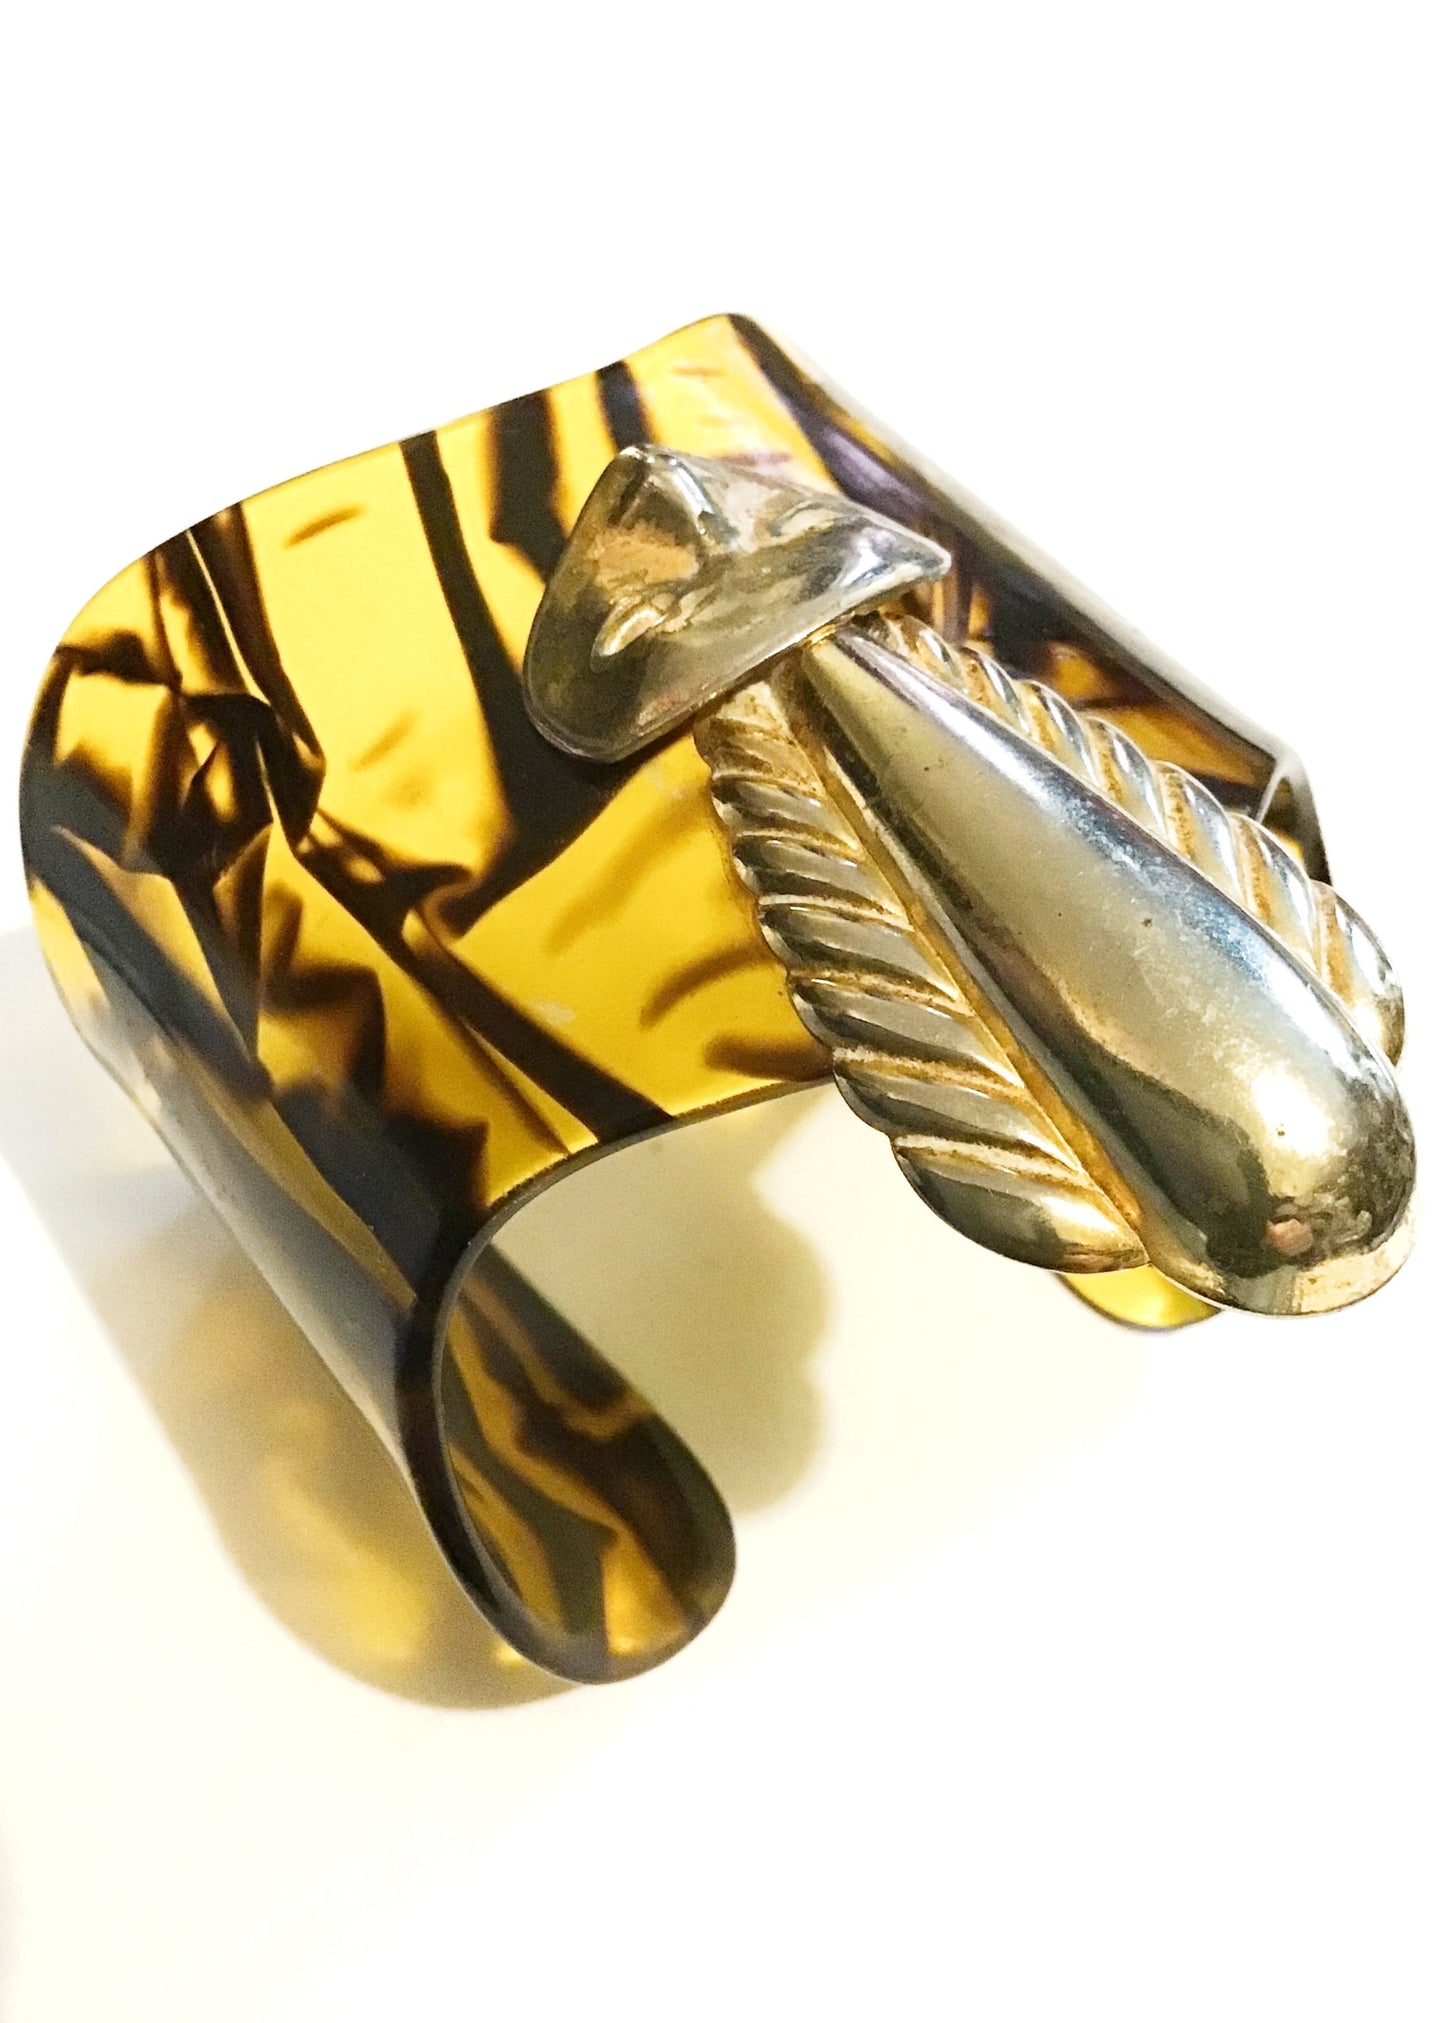 Amazing Faux Tortie Lucite Cuff Bangle Bracelet with Brass Masquerade Face